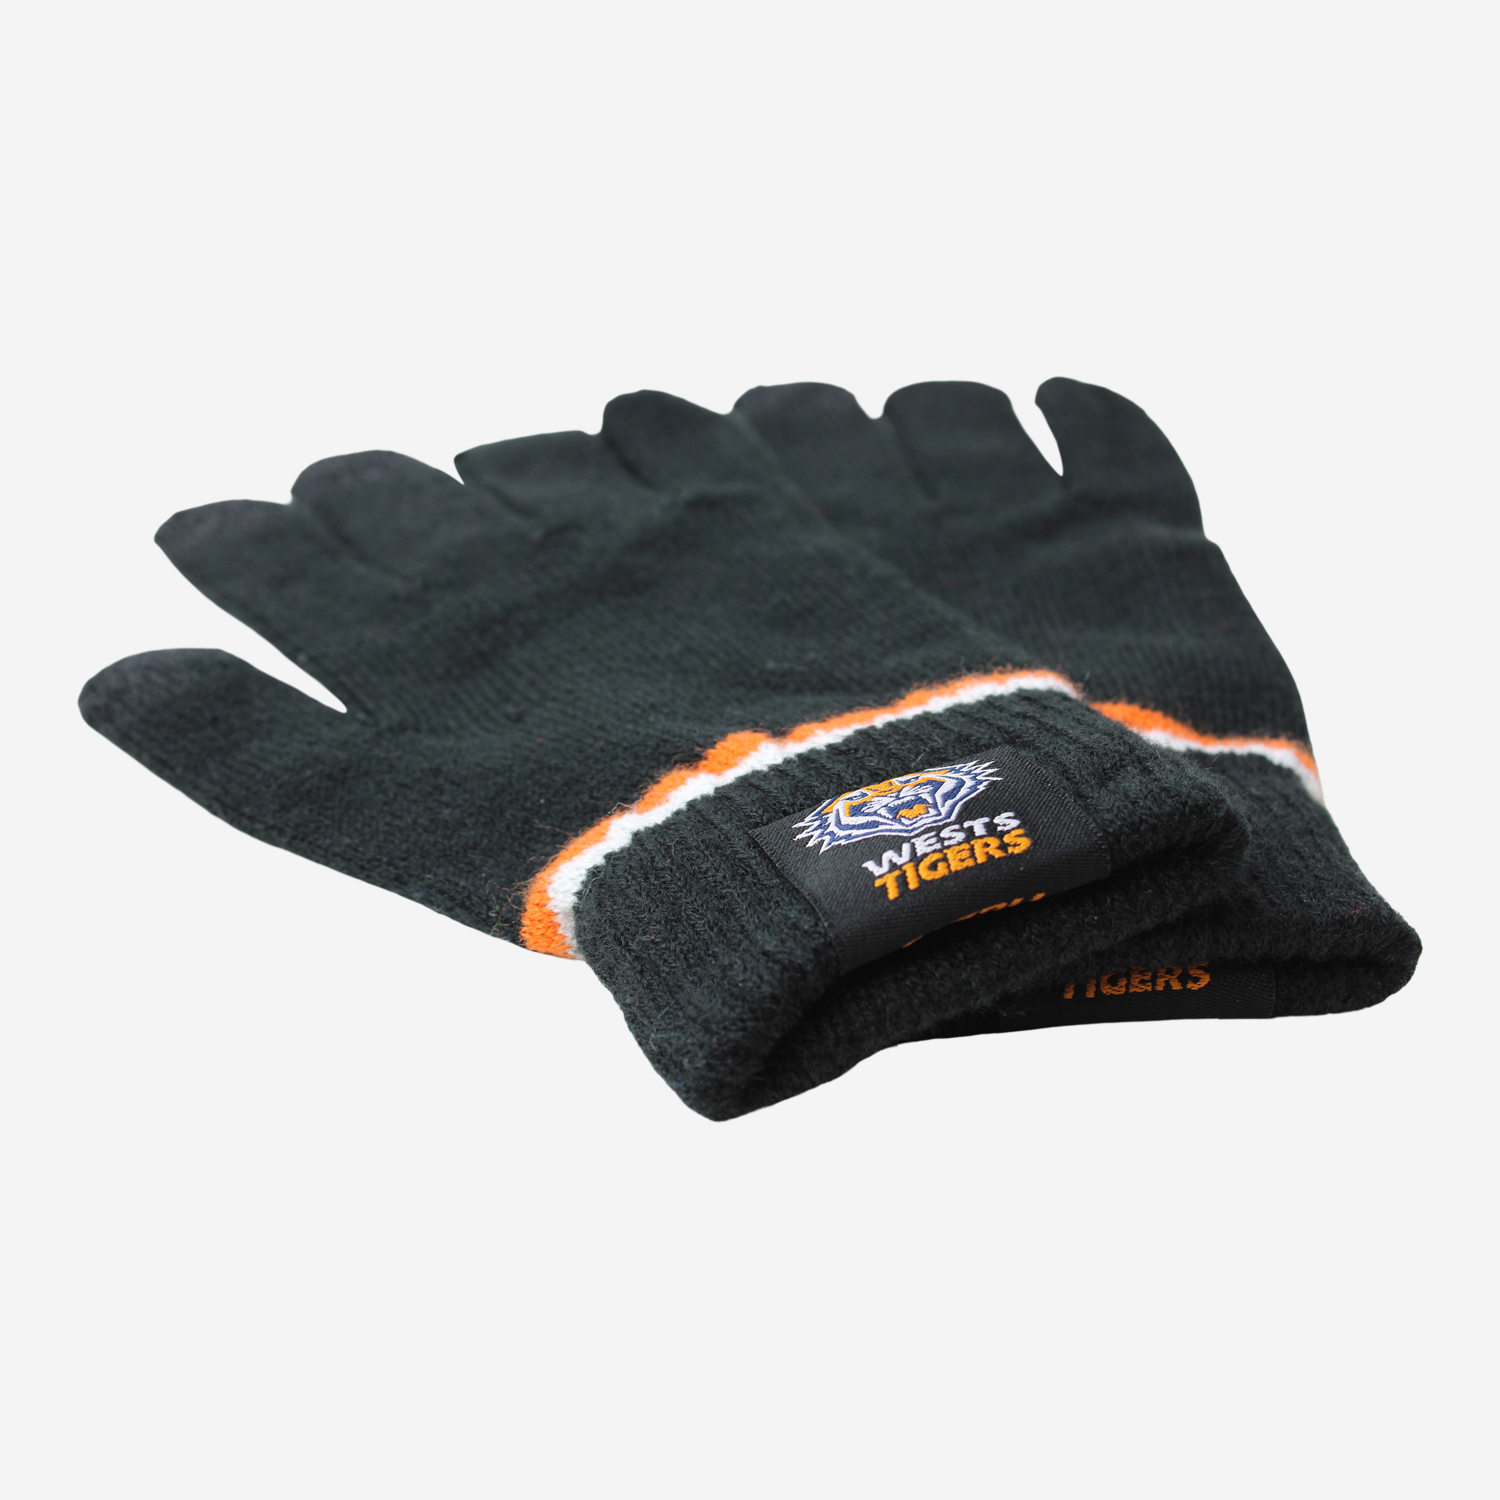 WESTS TIGERS NRL TOUCHSCREEN GLOVES